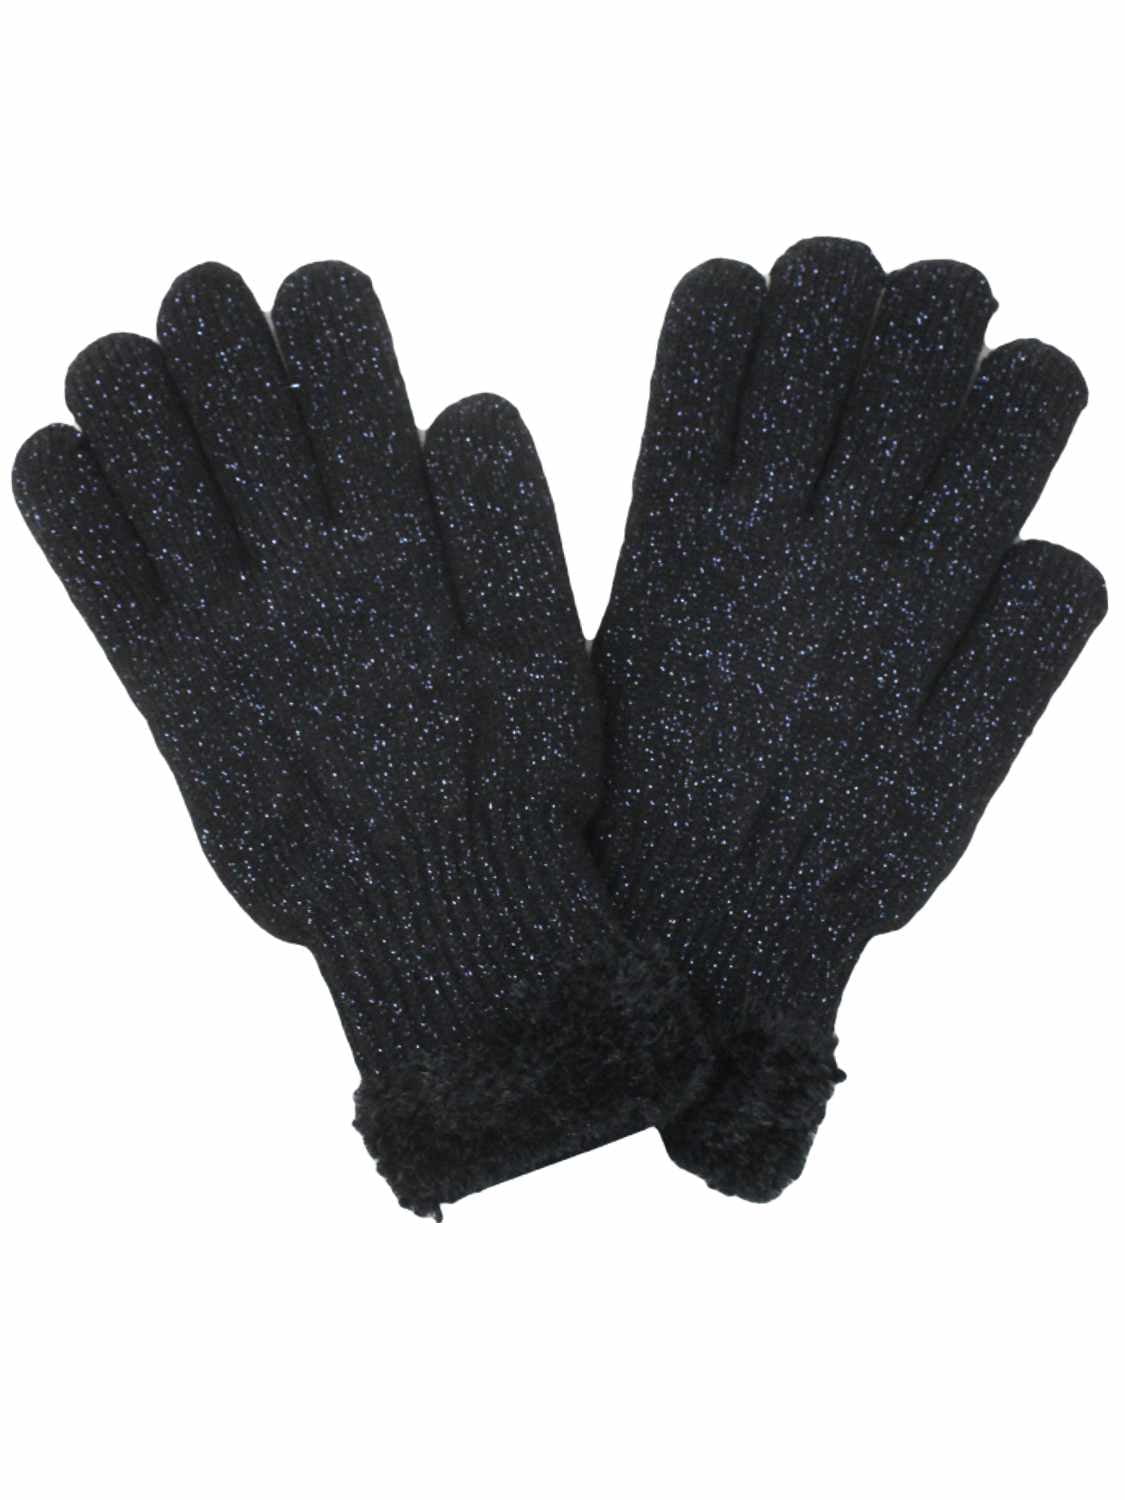 Black Stallion 2300S Natural Rubber Coated, Cotton/Poly String Knit Synthetic Gloves, Size Small